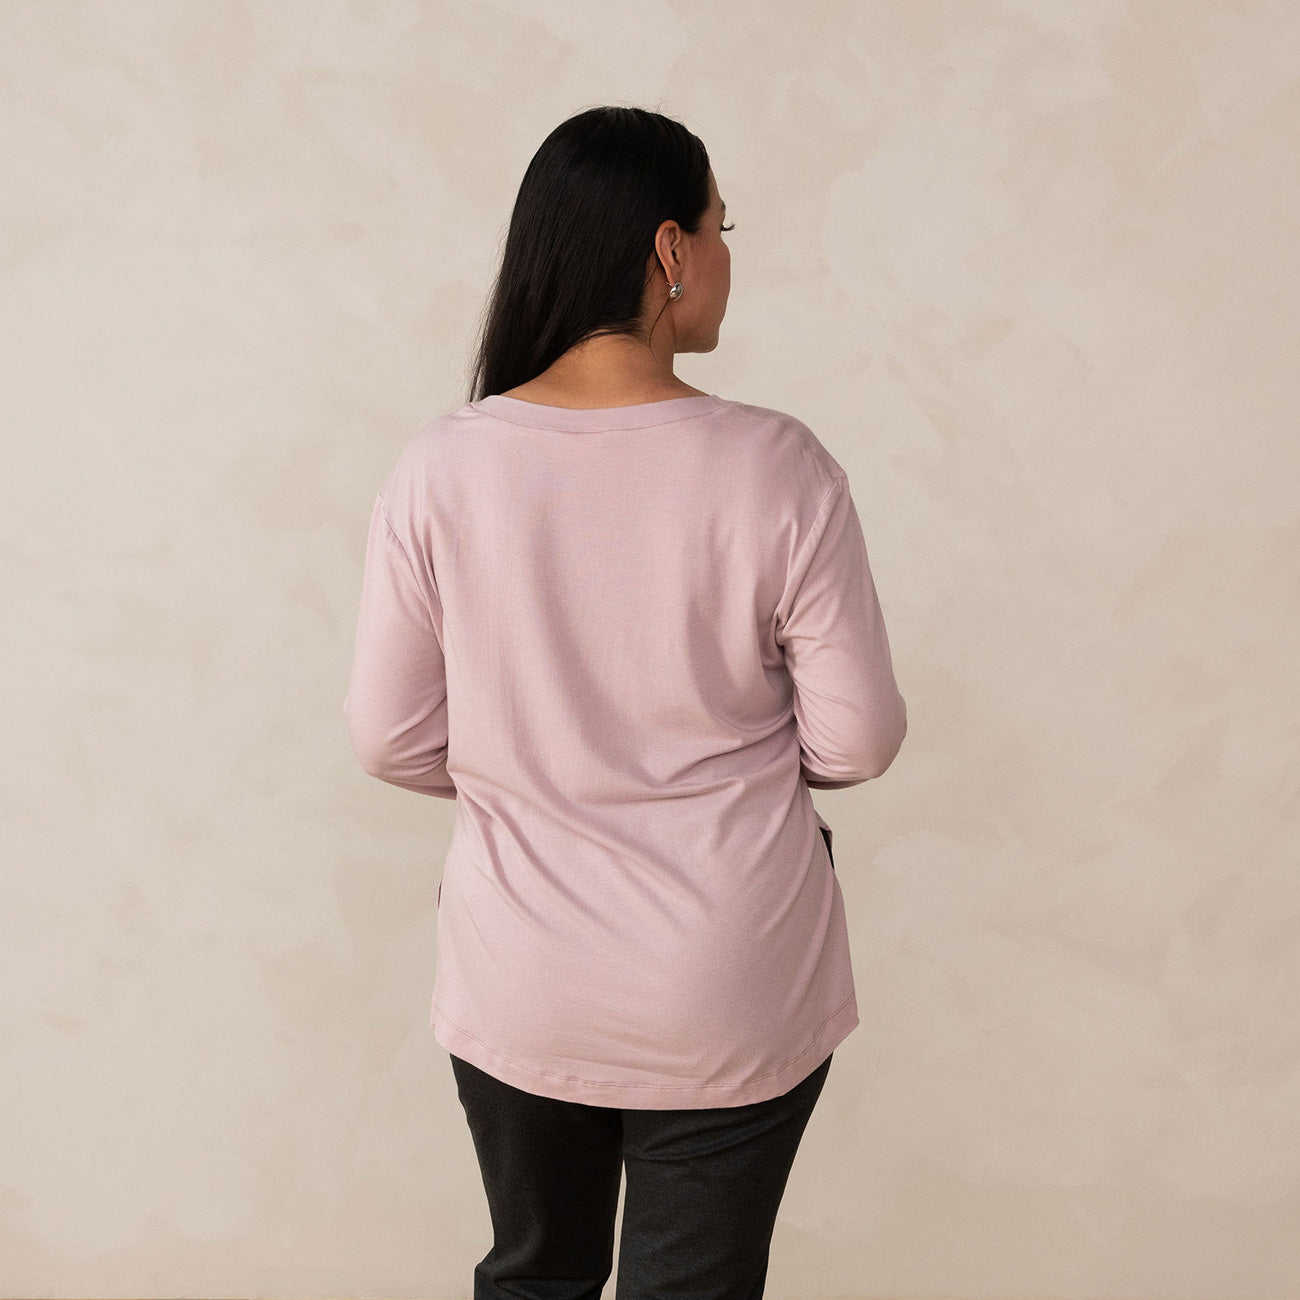 back of a woman wearing a long sleeve scoop neck light pink top